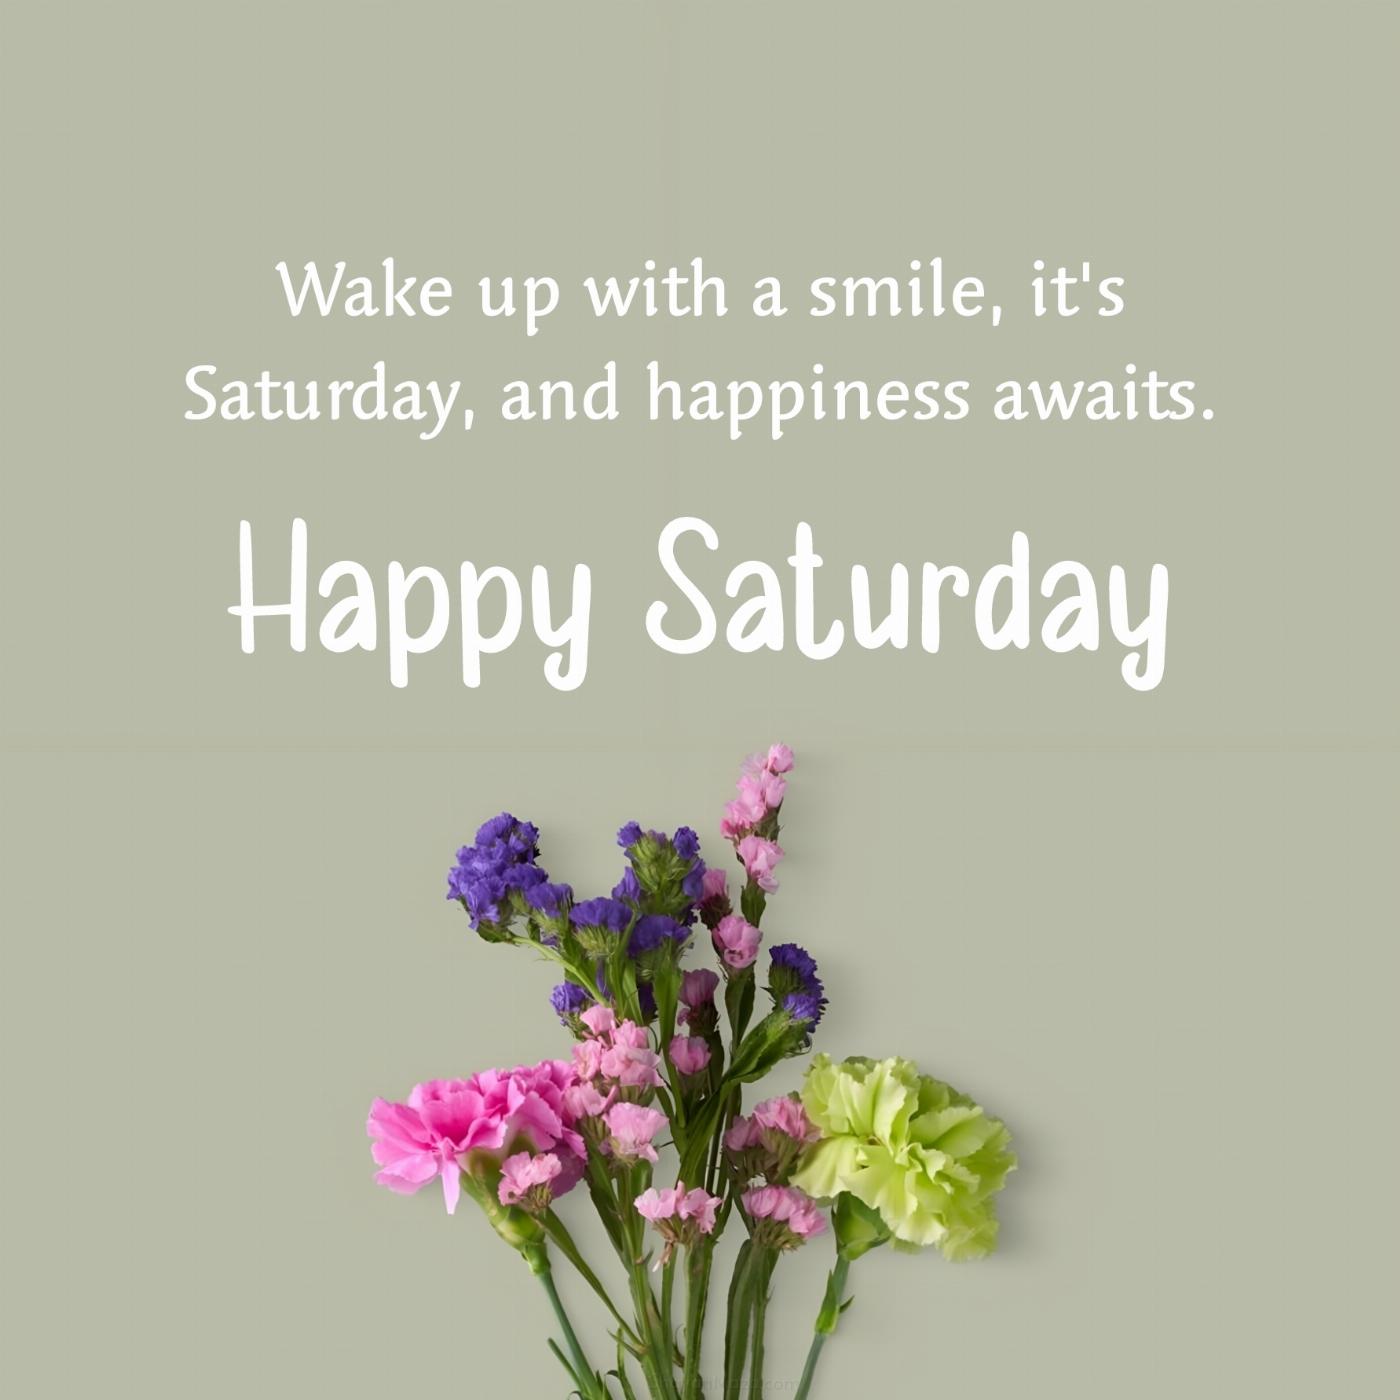 Wake up with a smile it's Saturday and happiness awaits